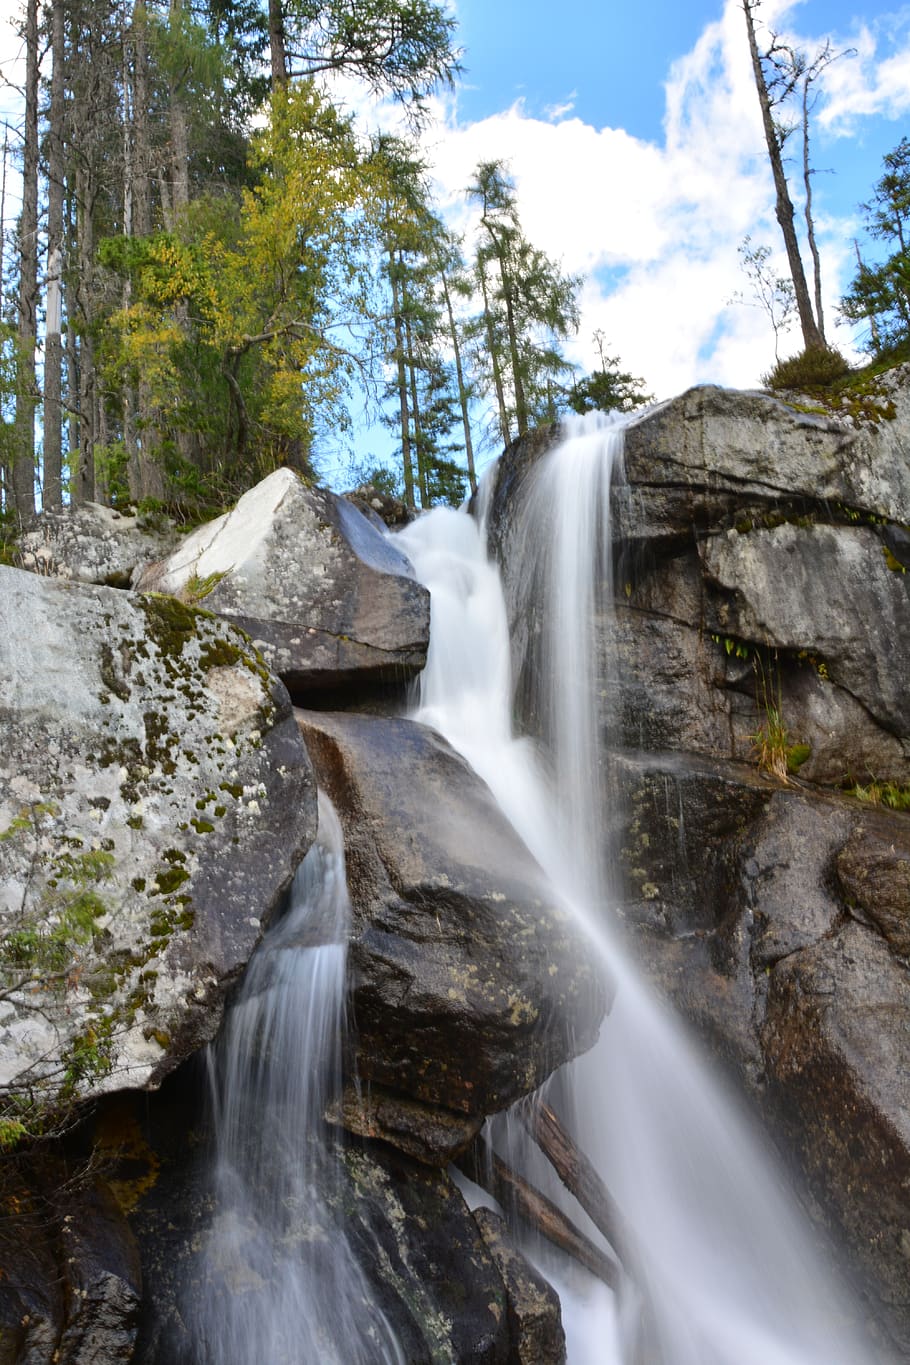 waterfall, water, nature, river, rock, slovakia, high tatras, scenics - nature, flowing water, beauty in nature